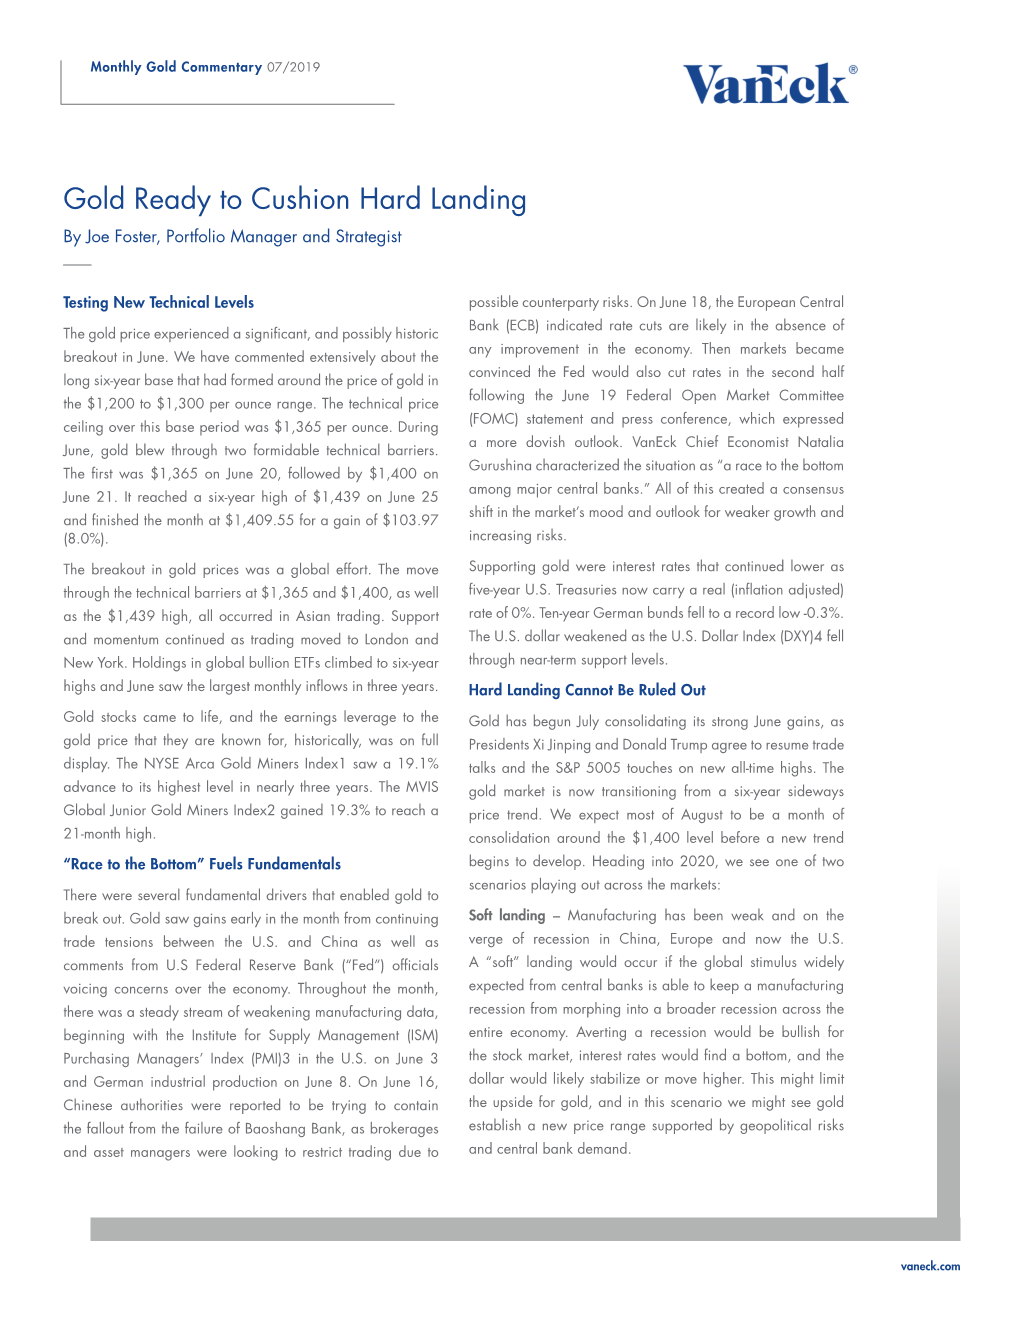 Gold Ready to Cushion Hard Landing by Joe Foster, Portfolio Manager and Strategist